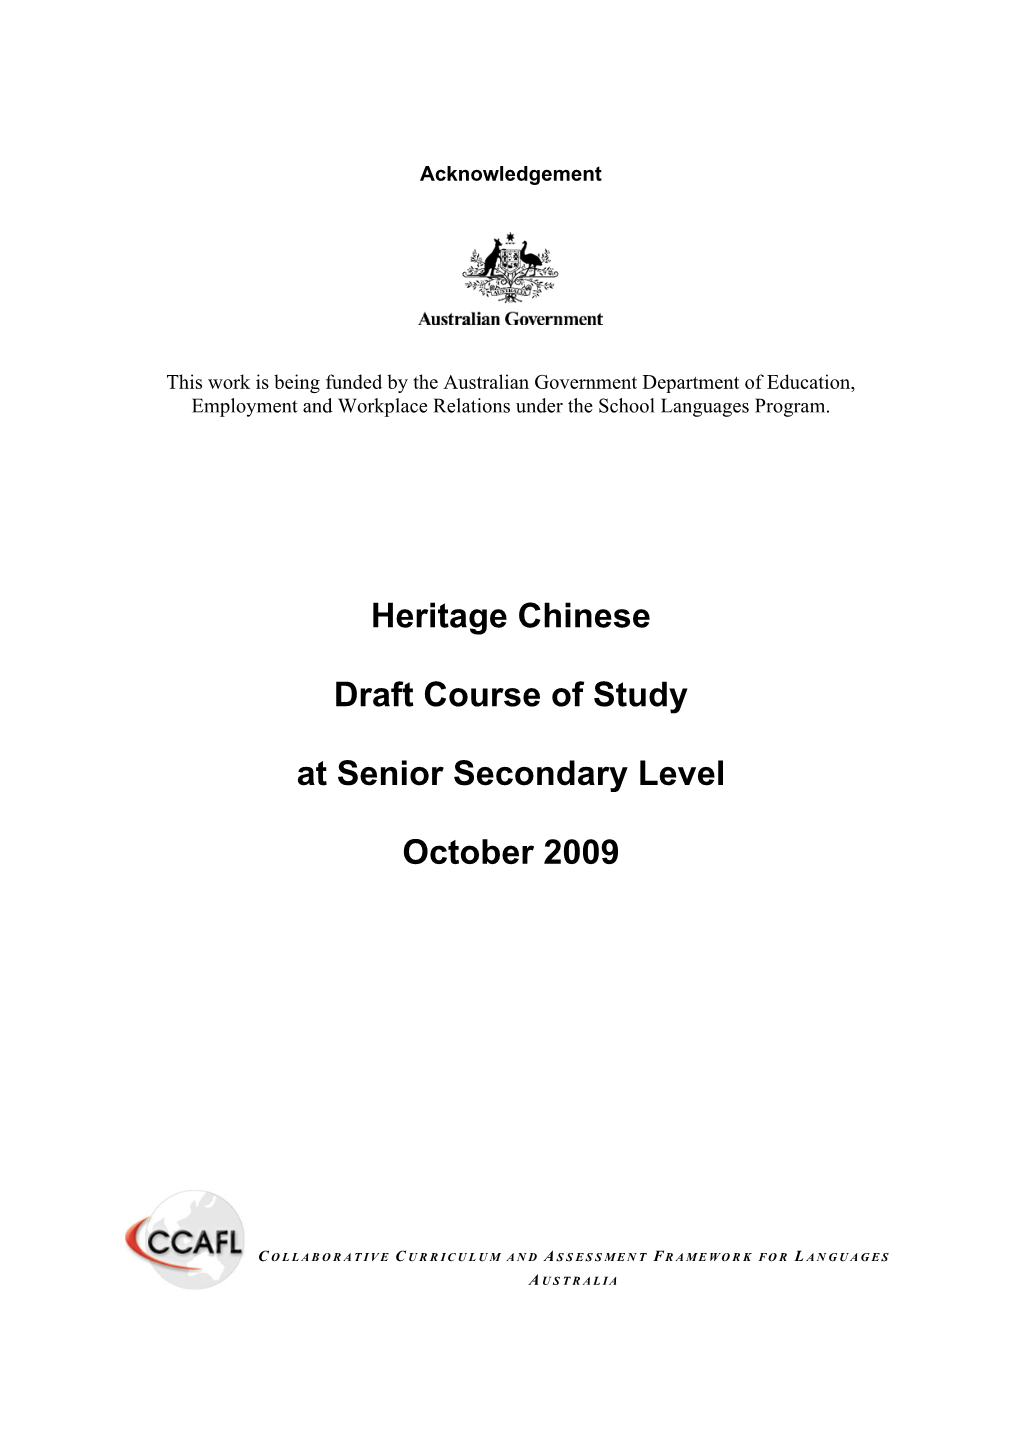 Heritage Chinese Draft Course of Study at Senior Secondary Level